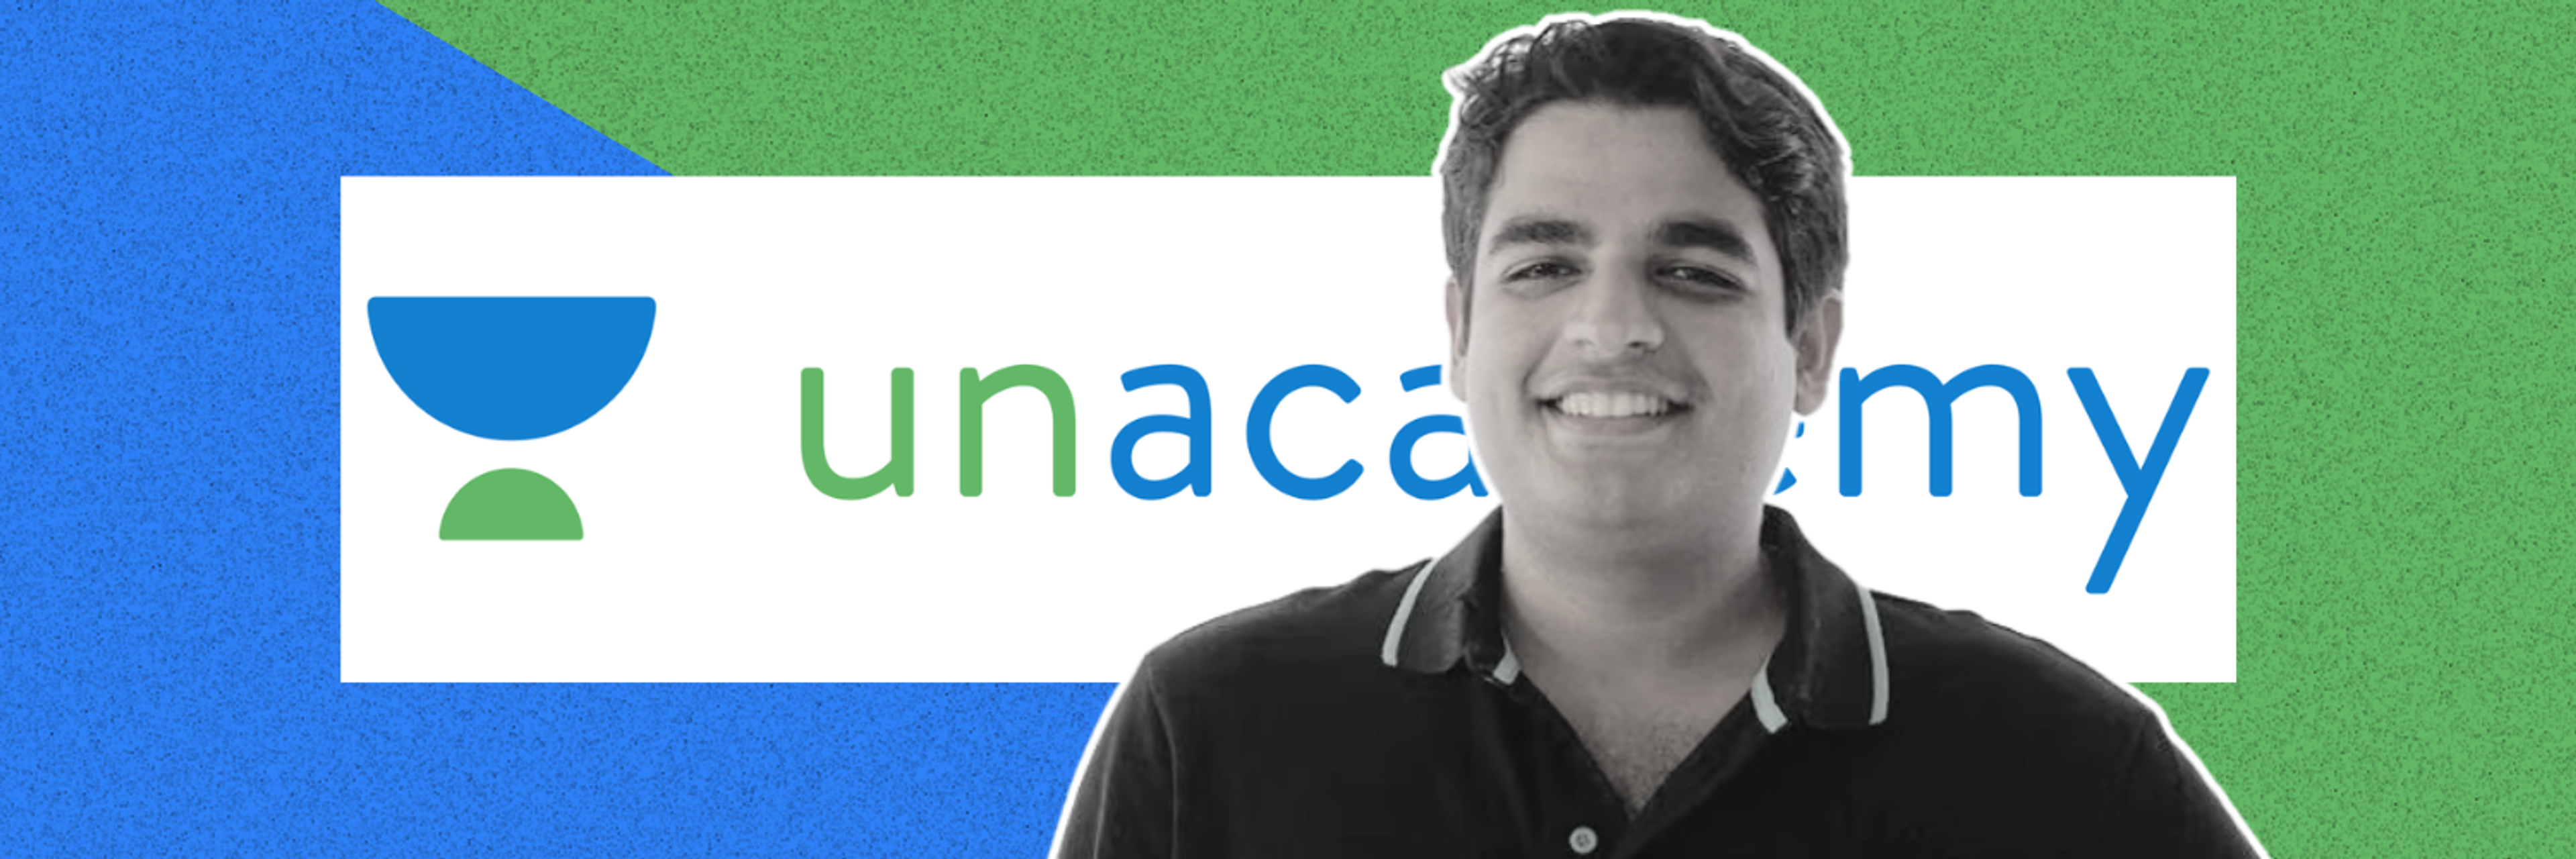 Unacademy founder Gaurav Munjal in front of the Unacademy logo, addressing recent company developments and future growth plans.